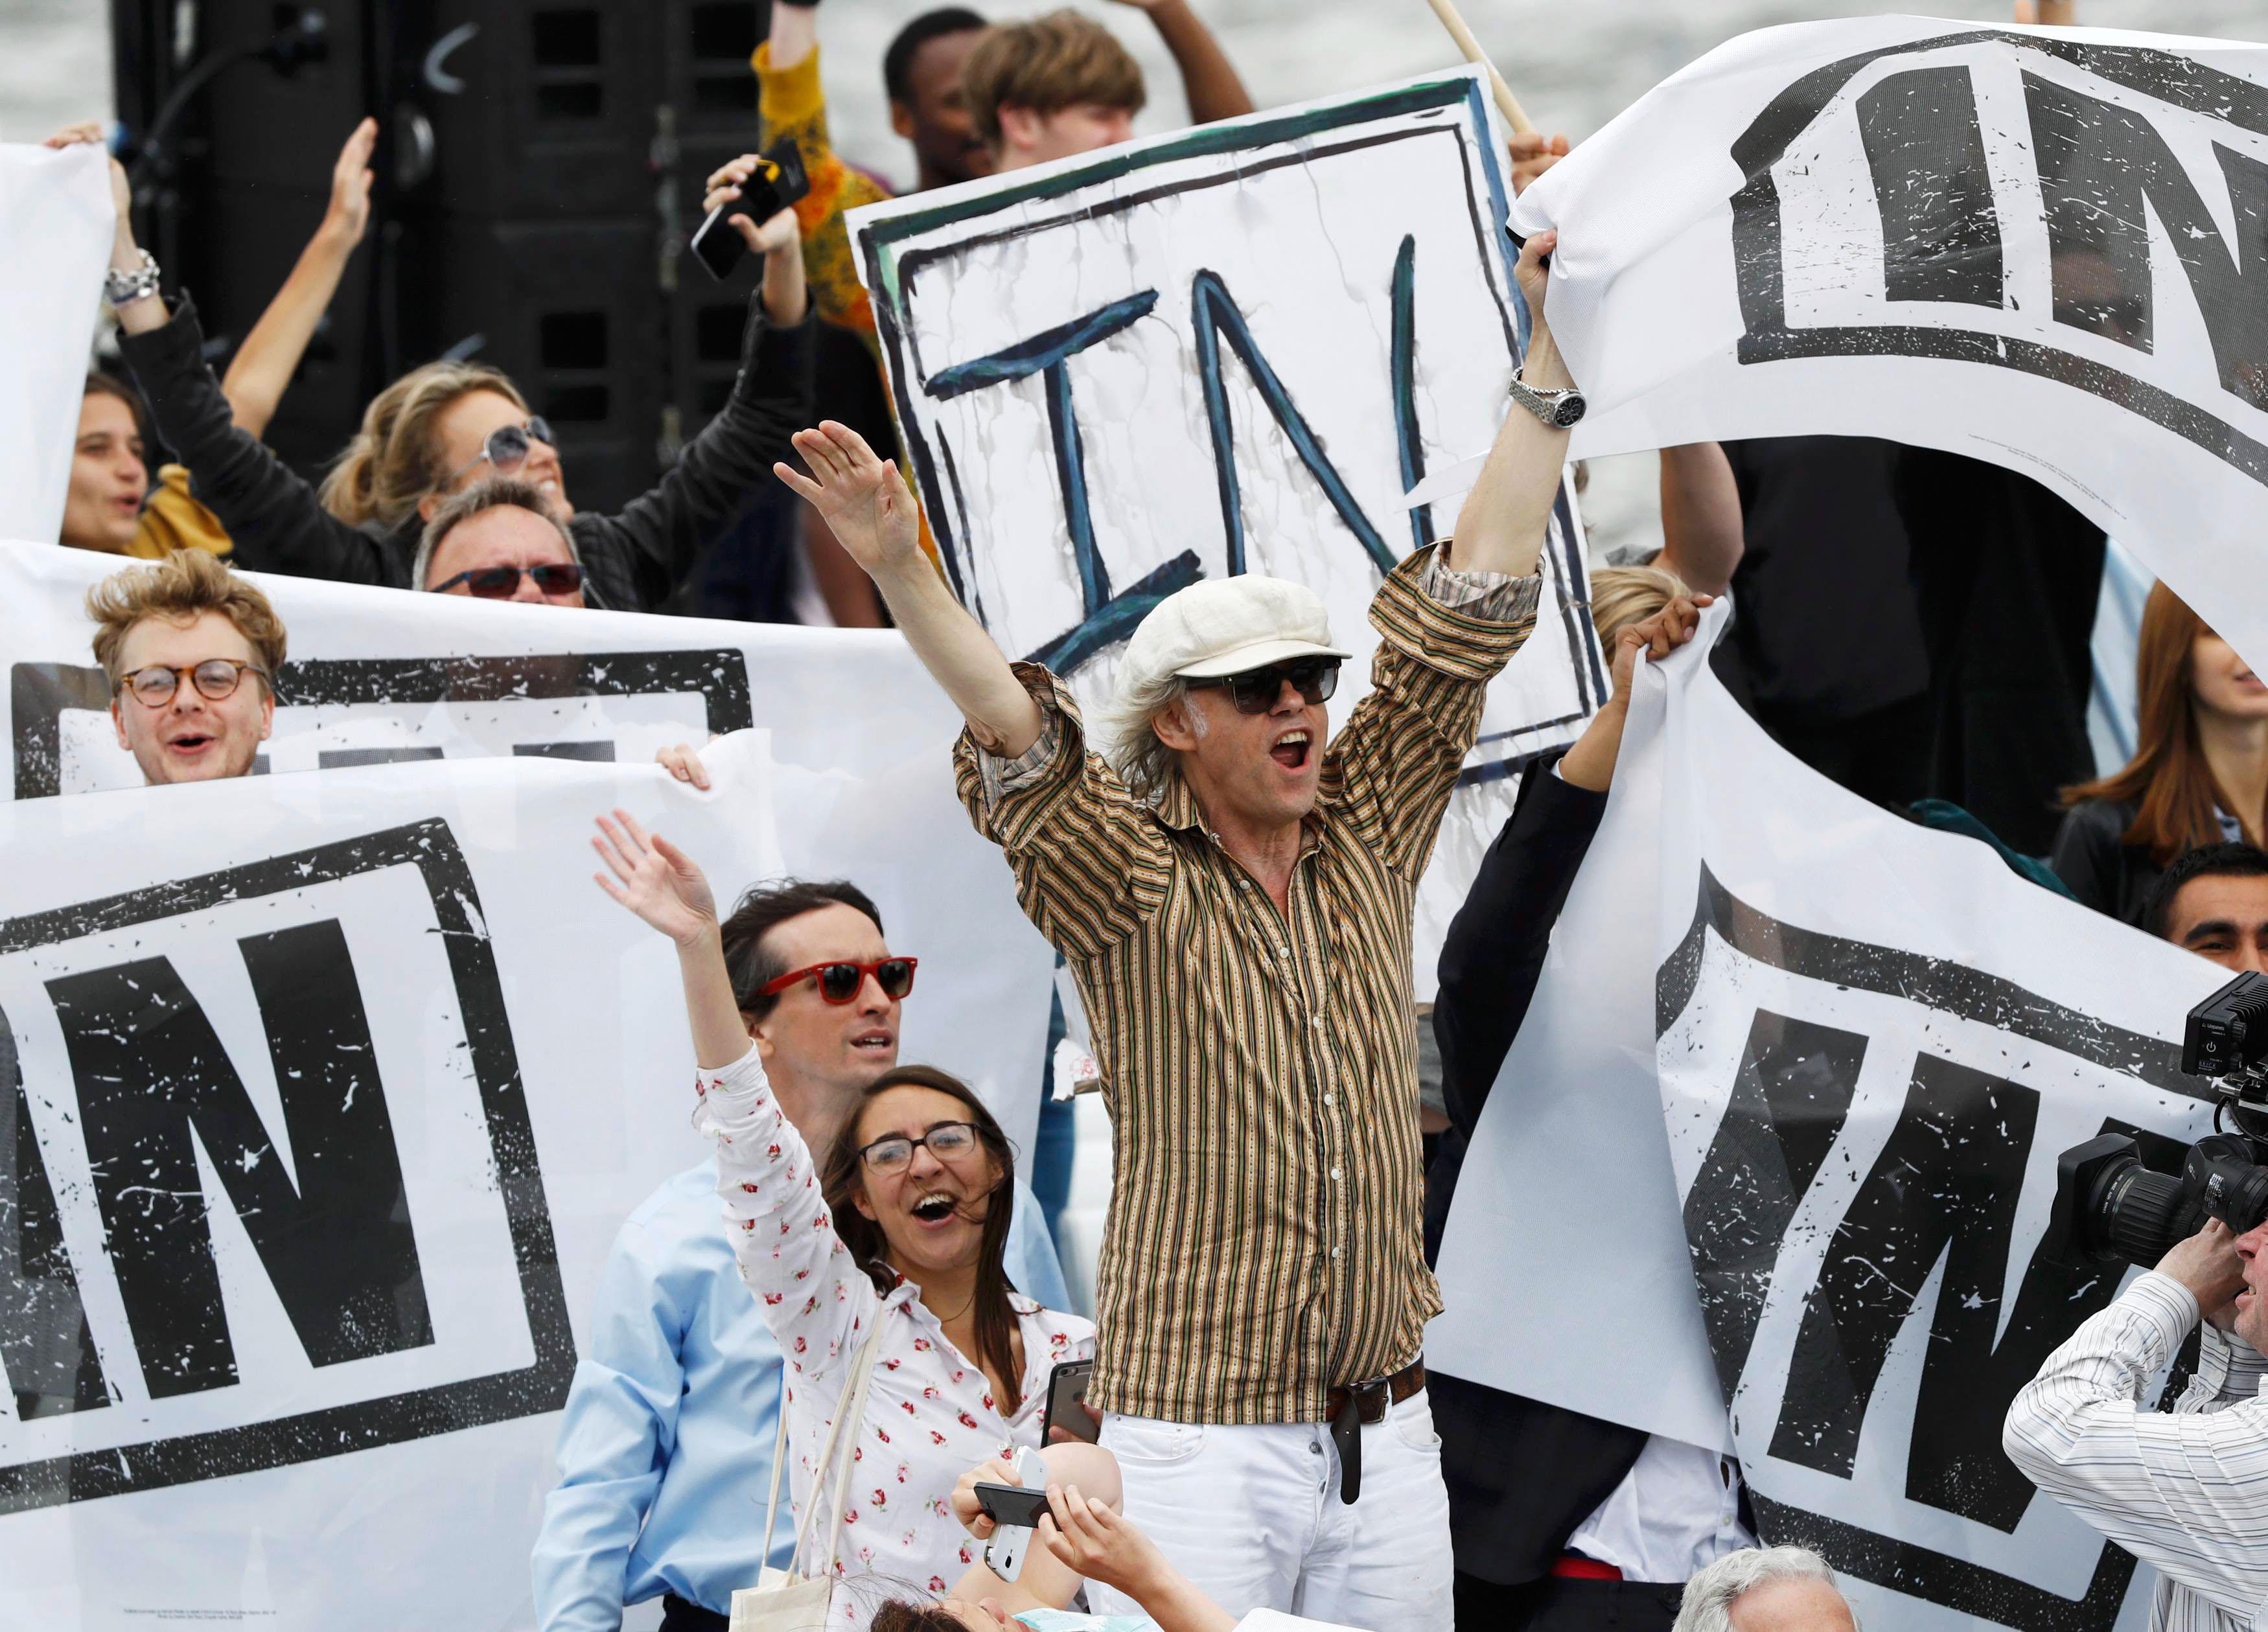 Musician and campaigner Bob Geldof (C) joins a counter demonstration as a flotilla of fishing vessel